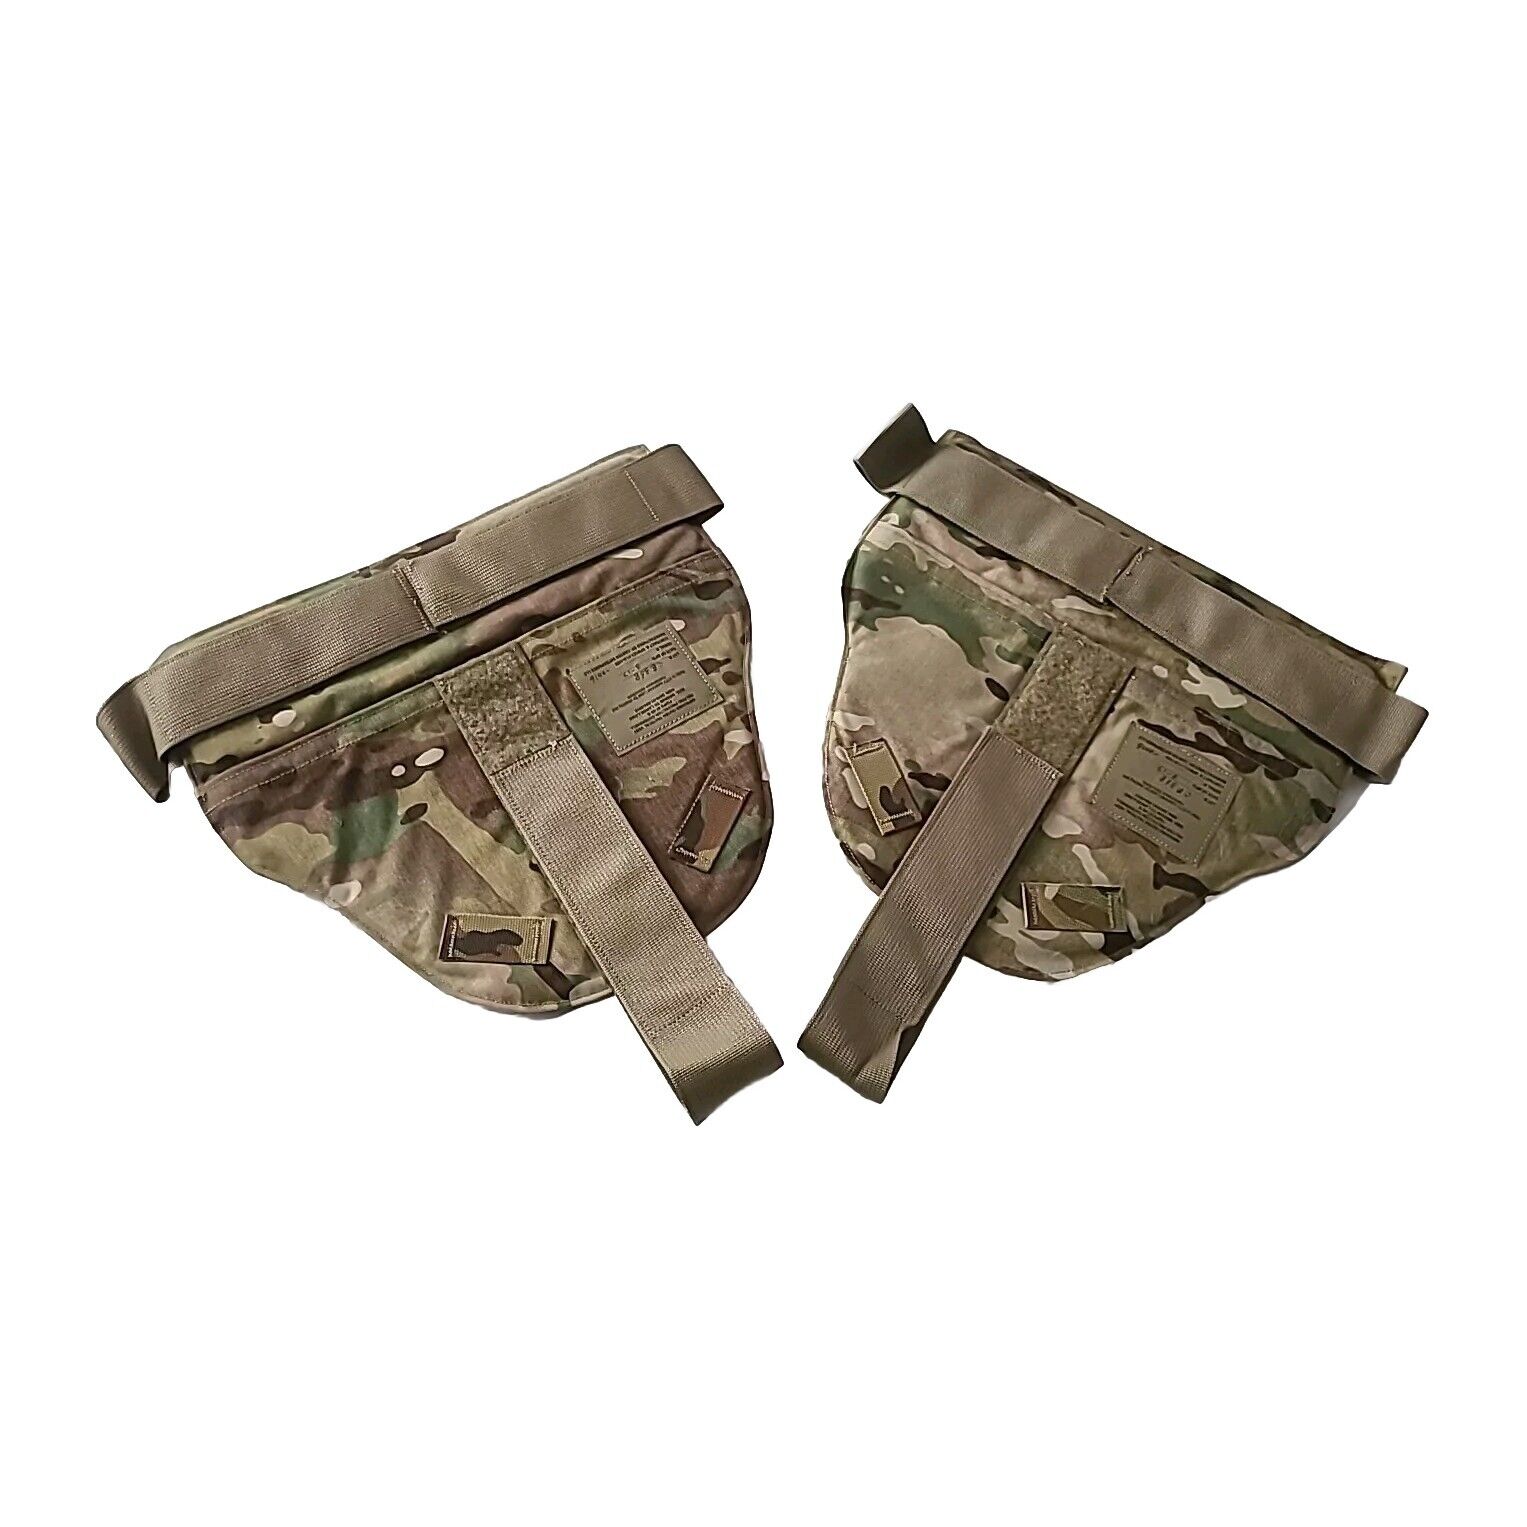 2 Deltoid Protector Outer Tactical Vests MEDIUM to LARGE Multicam OCP